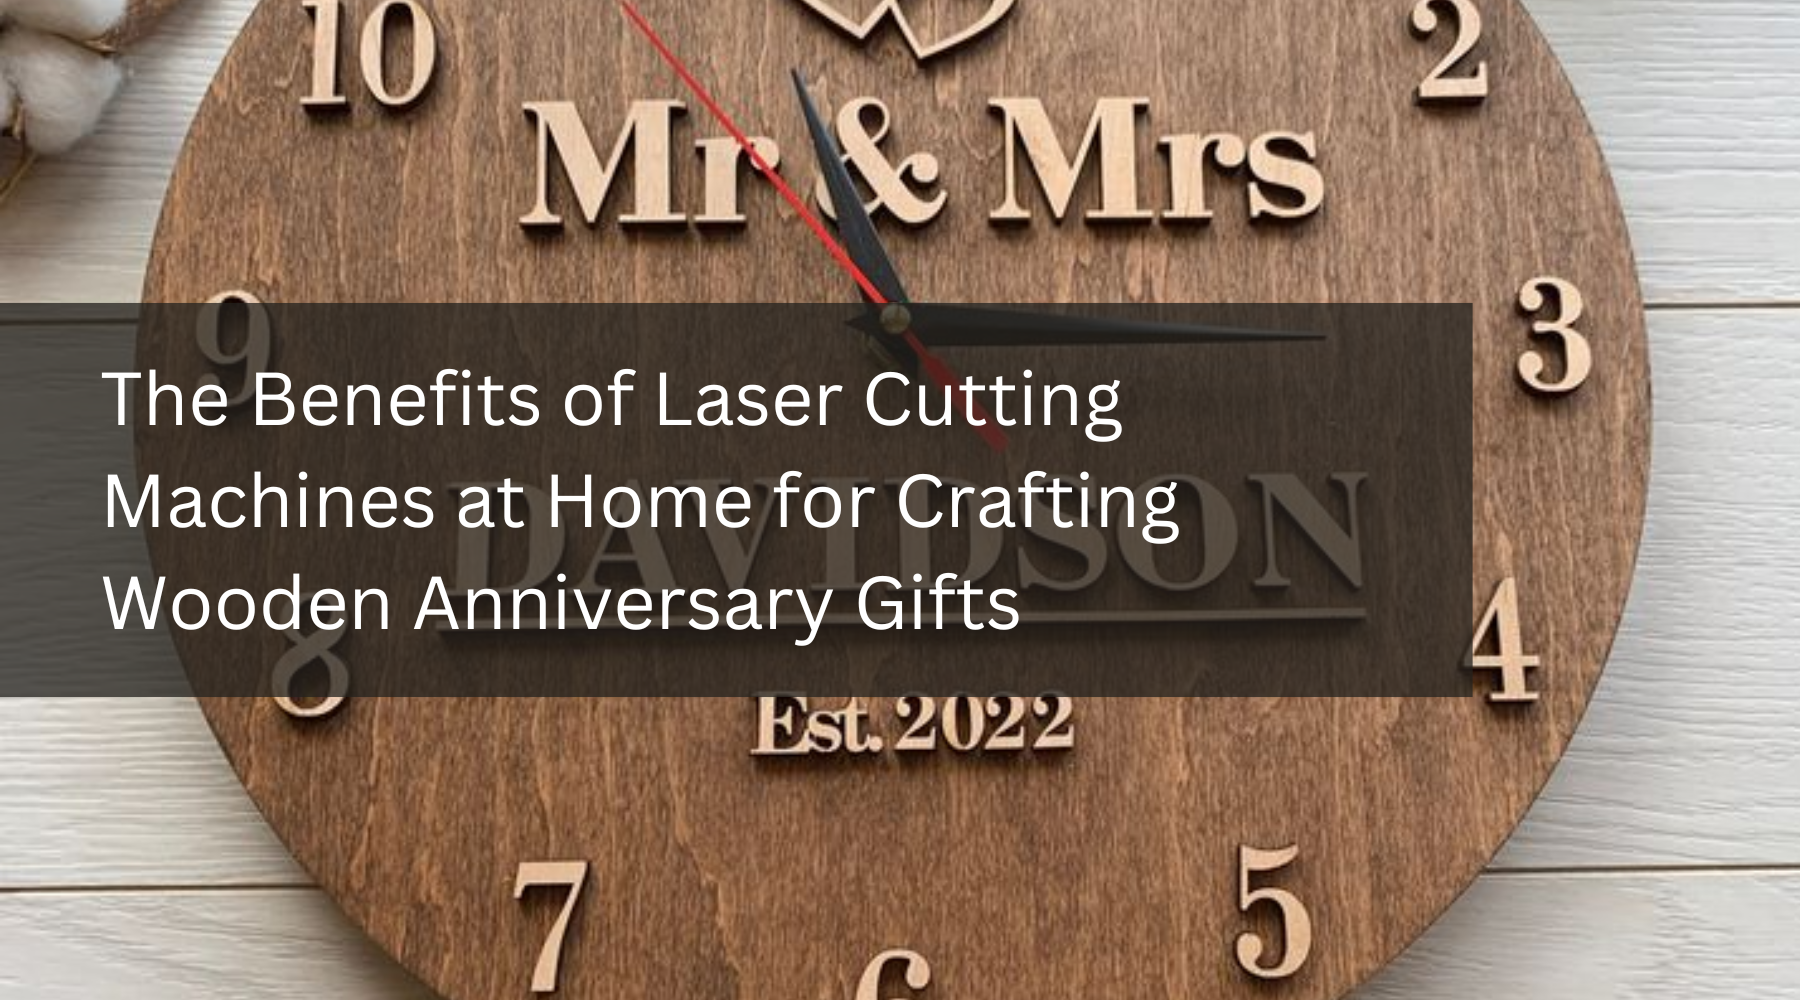 The Benefits of Laser Cutting Machines at Home for Crafting Wooden Anniversary Gifts